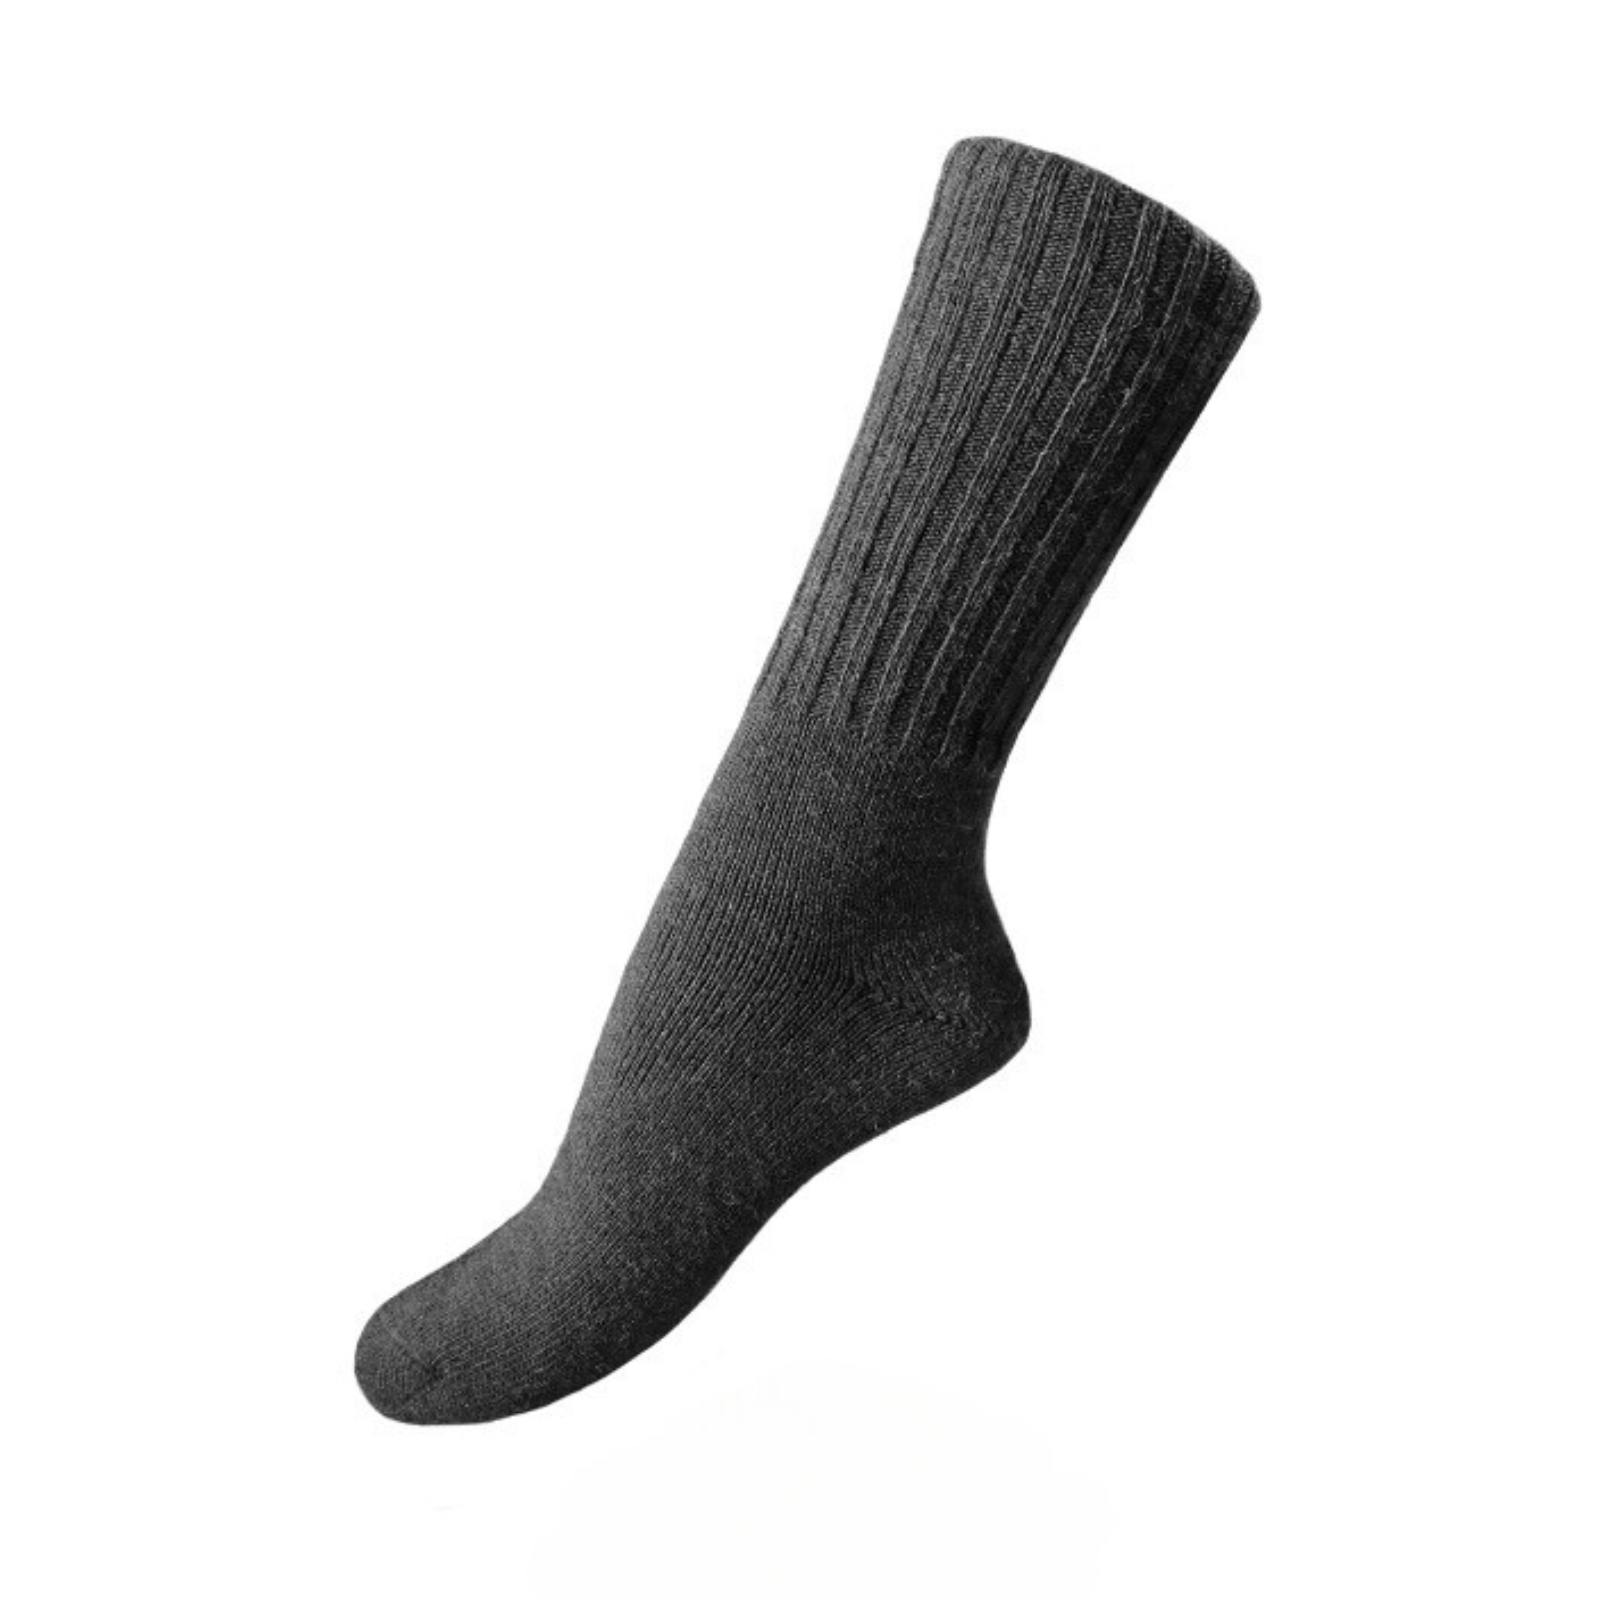 Charcoal Choice Alpaca Casual women's and men's crew socks with ribbing on display